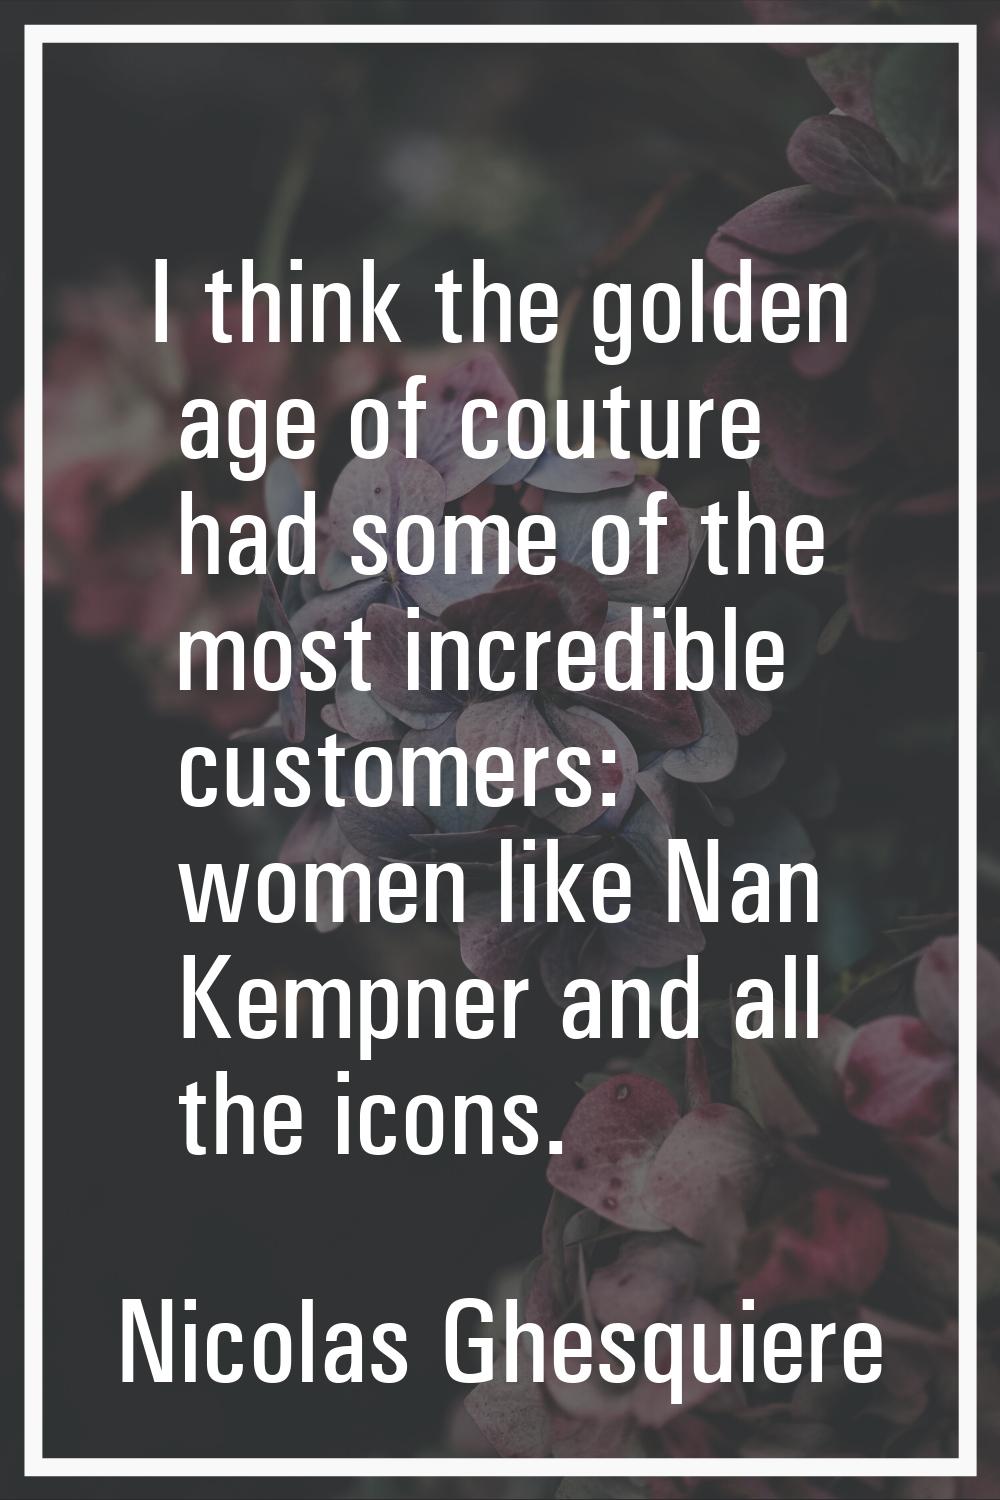 I think the golden age of couture had some of the most incredible customers: women like Nan Kempner